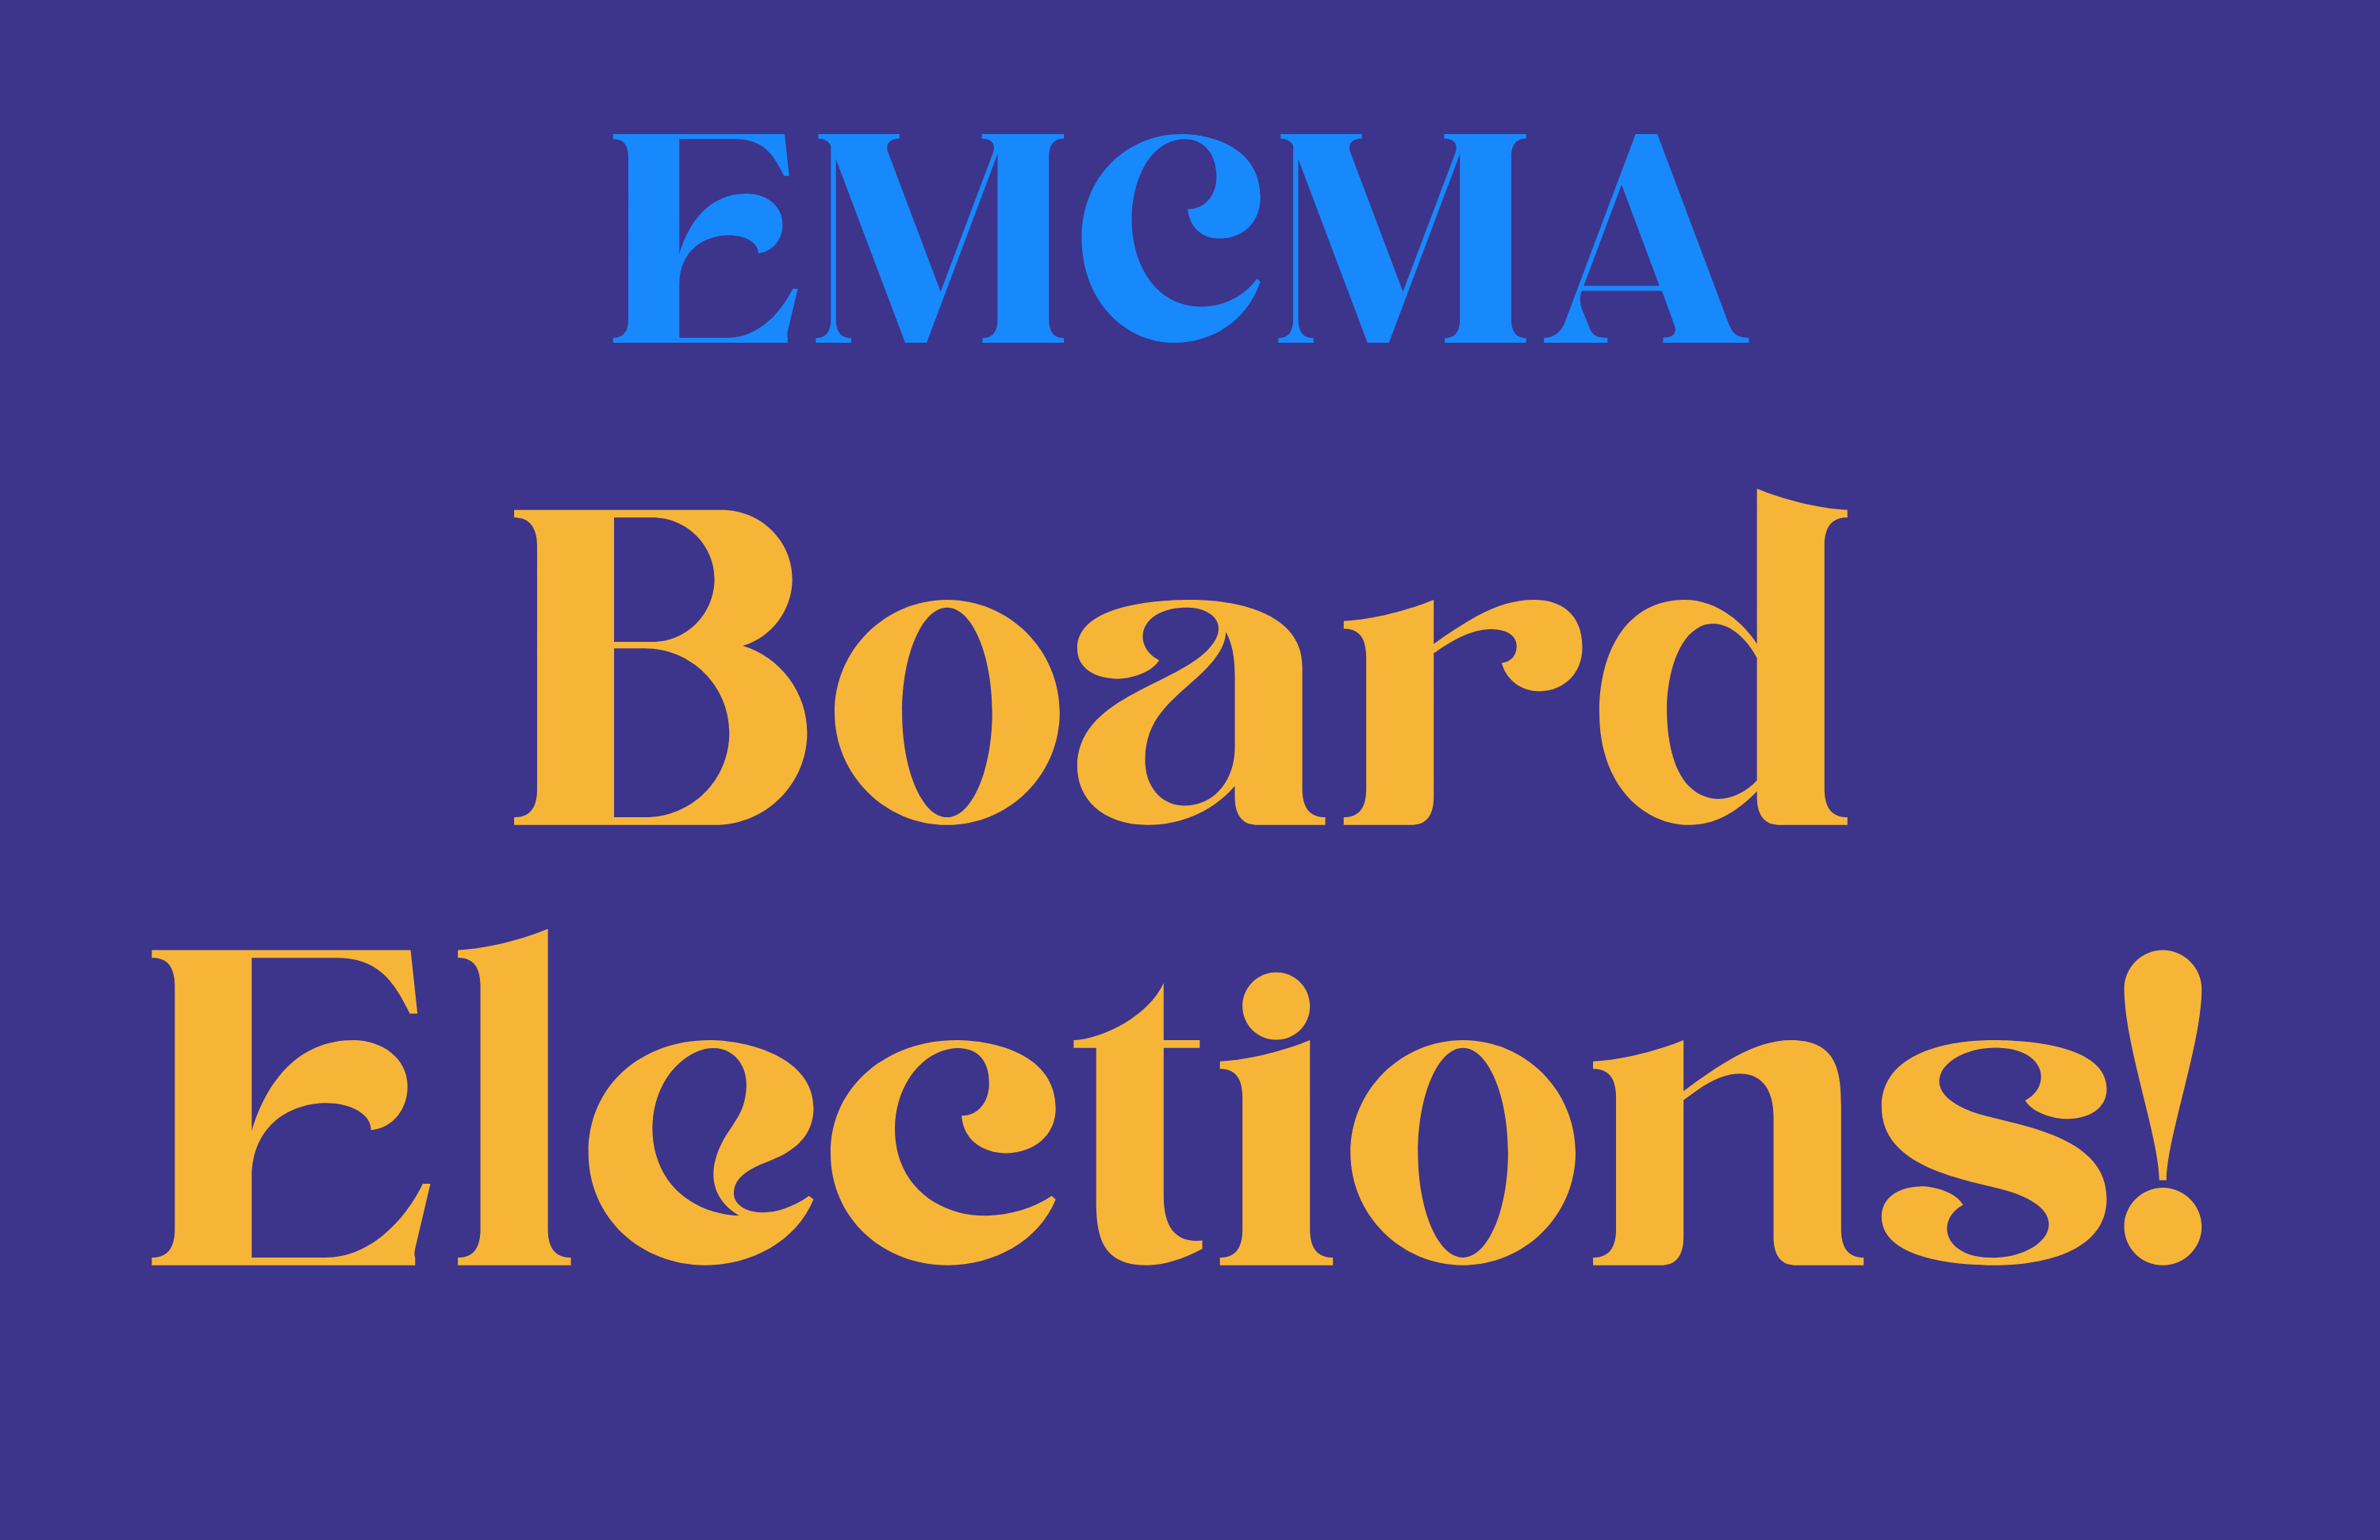 Graphic with text "EMCMA Board Elections!"